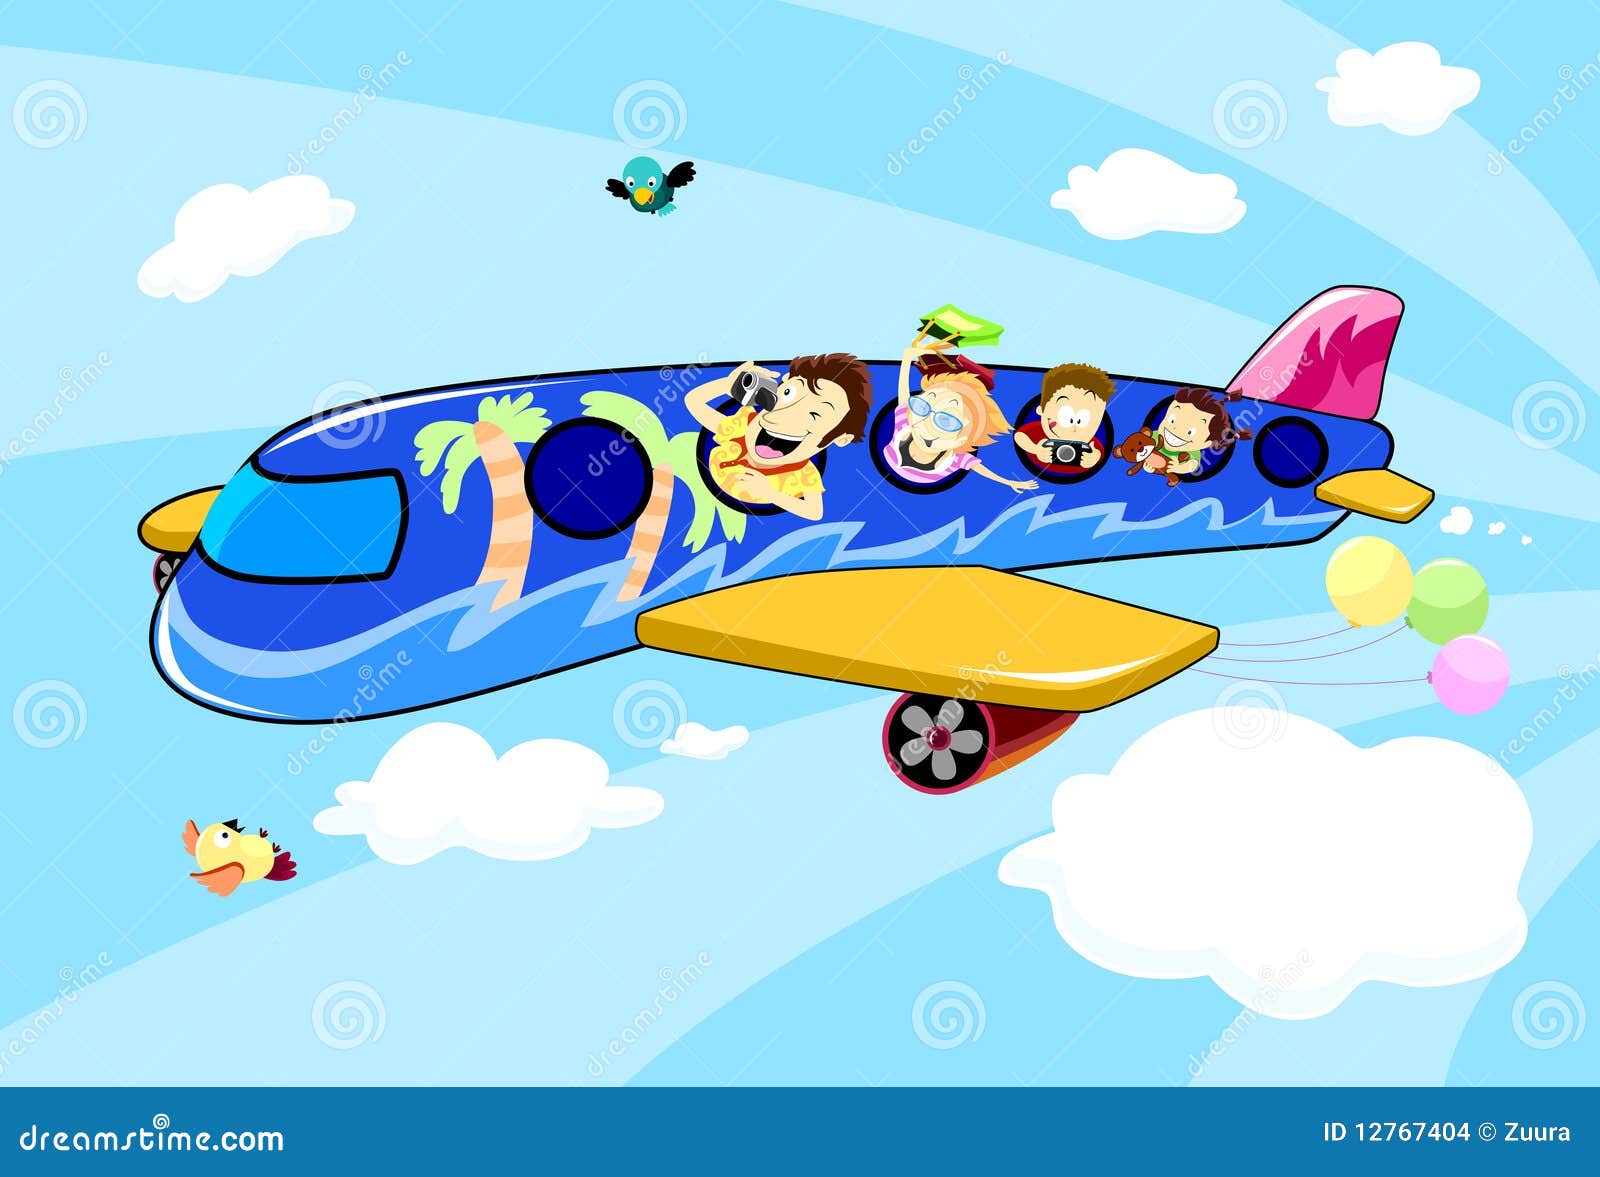 Family Vacation Trip On An Airplane Stock Images - Image: 12767404